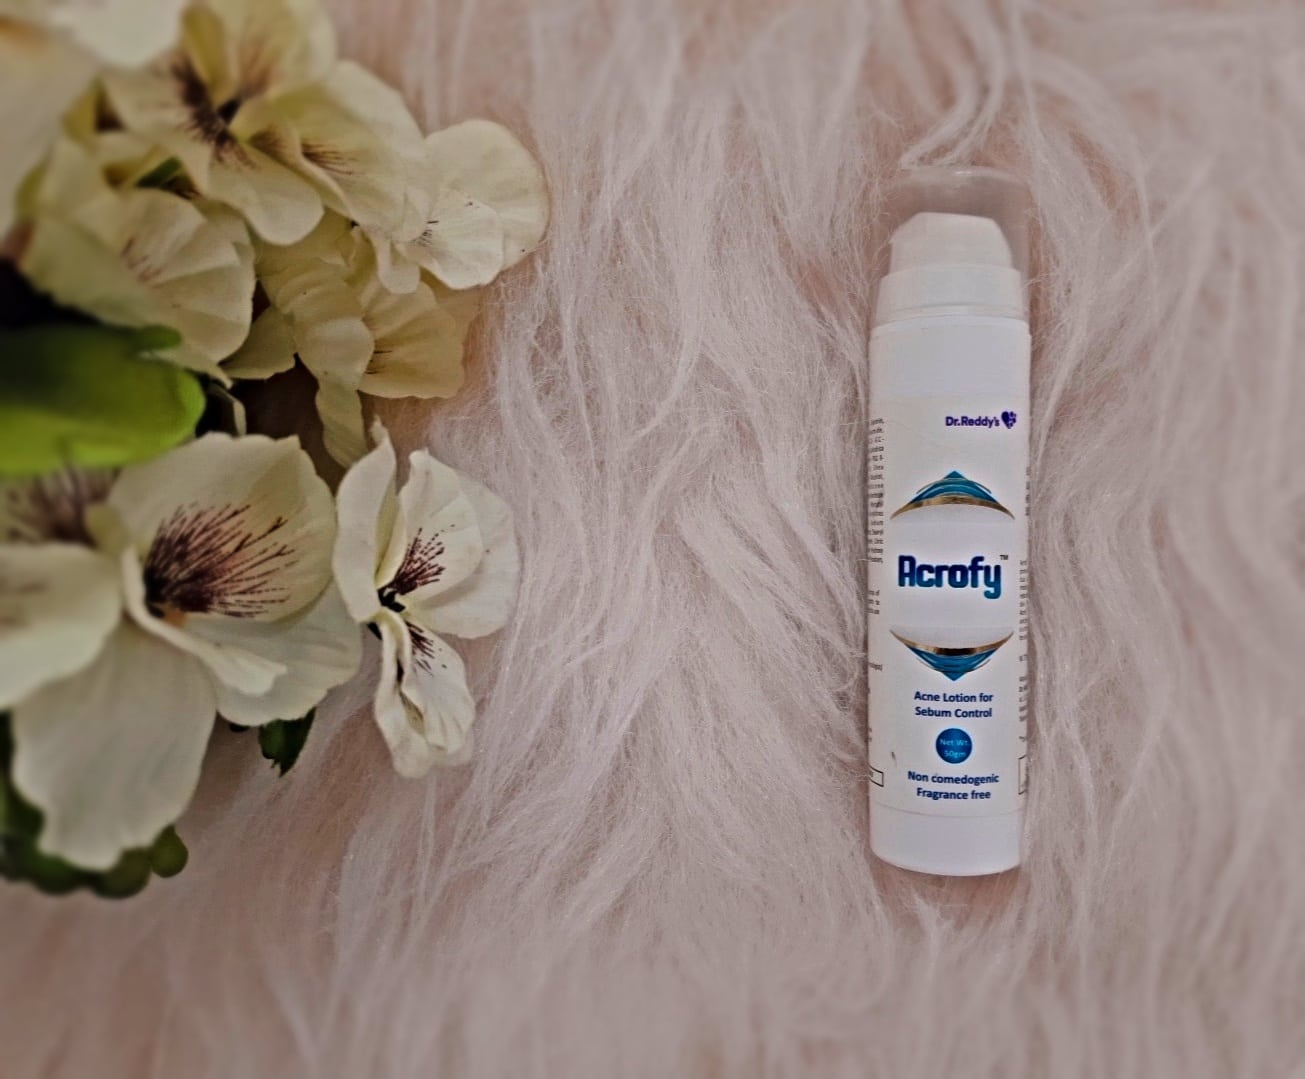 Acrofy lotion Review